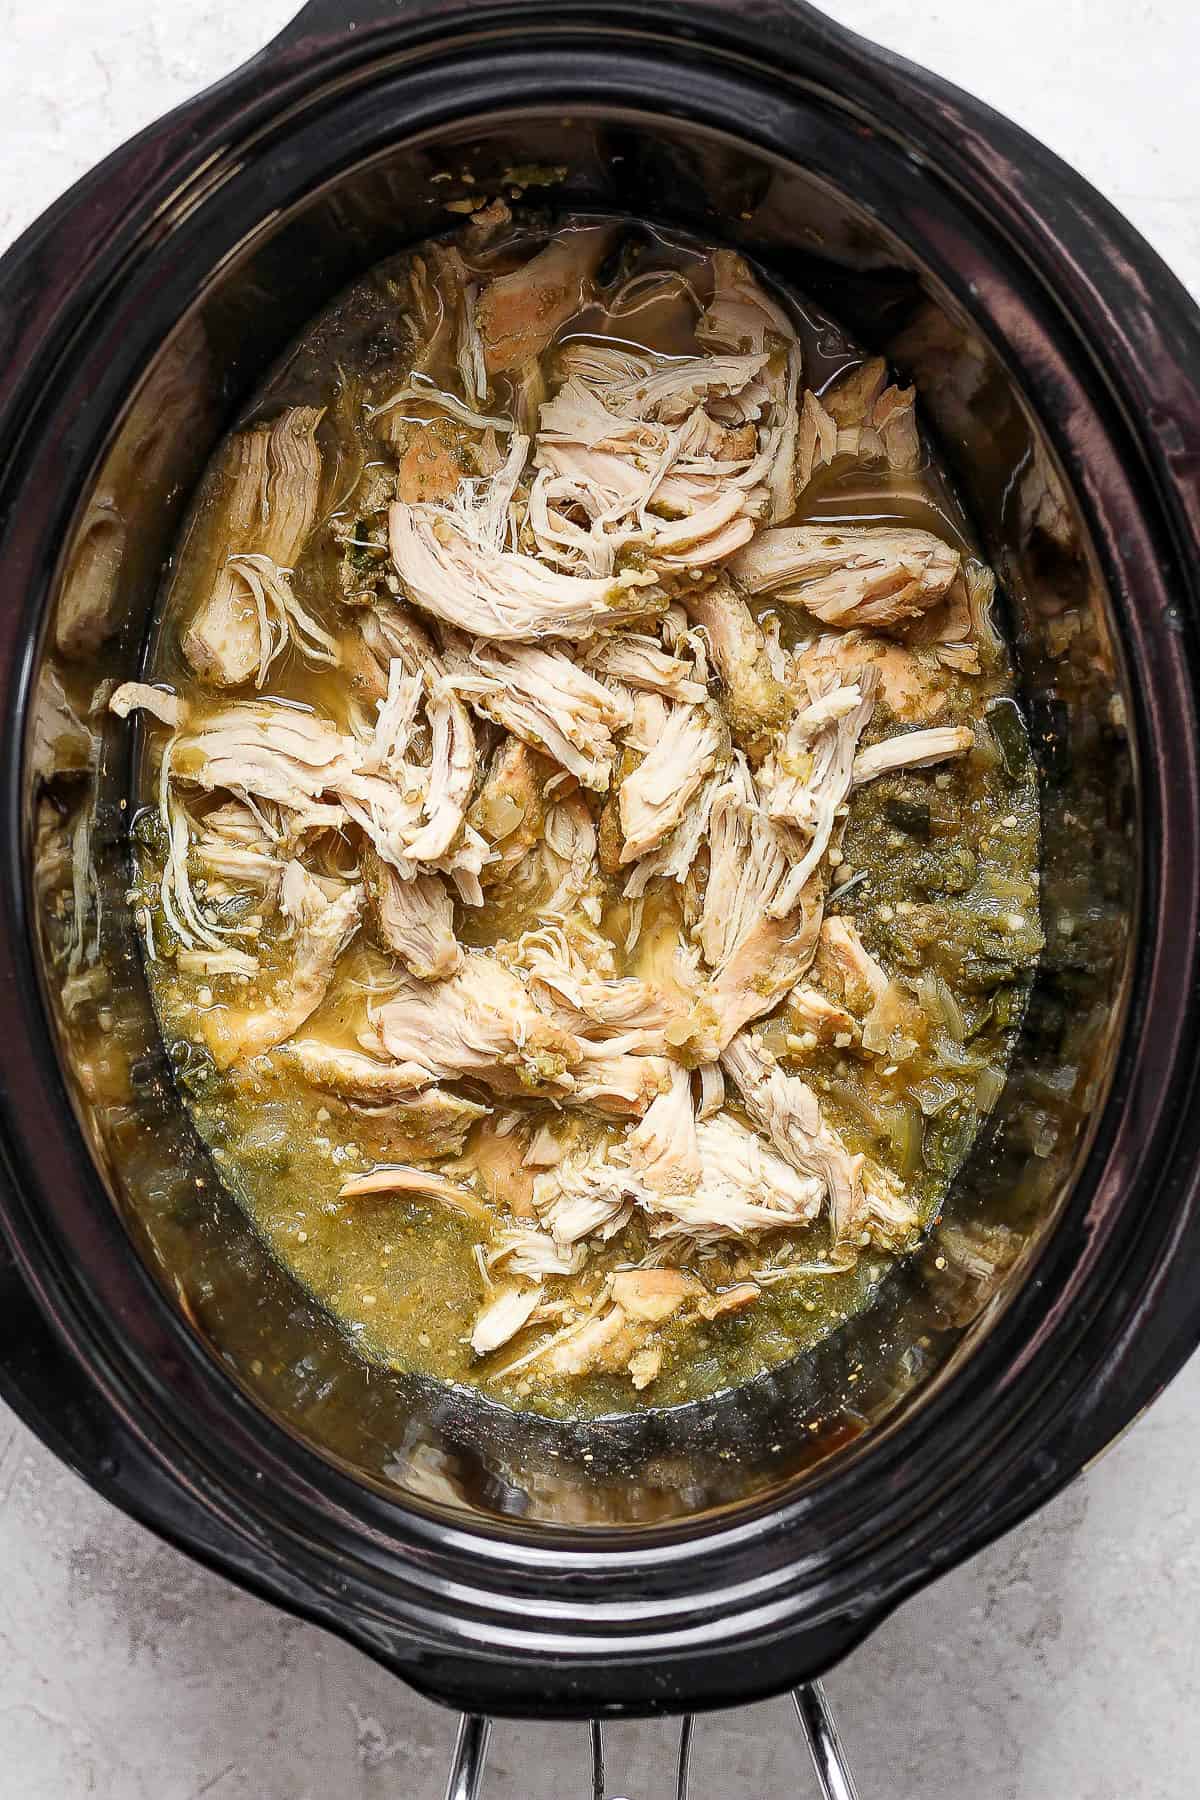 Cooked chicken has been shredded inside the crockpot